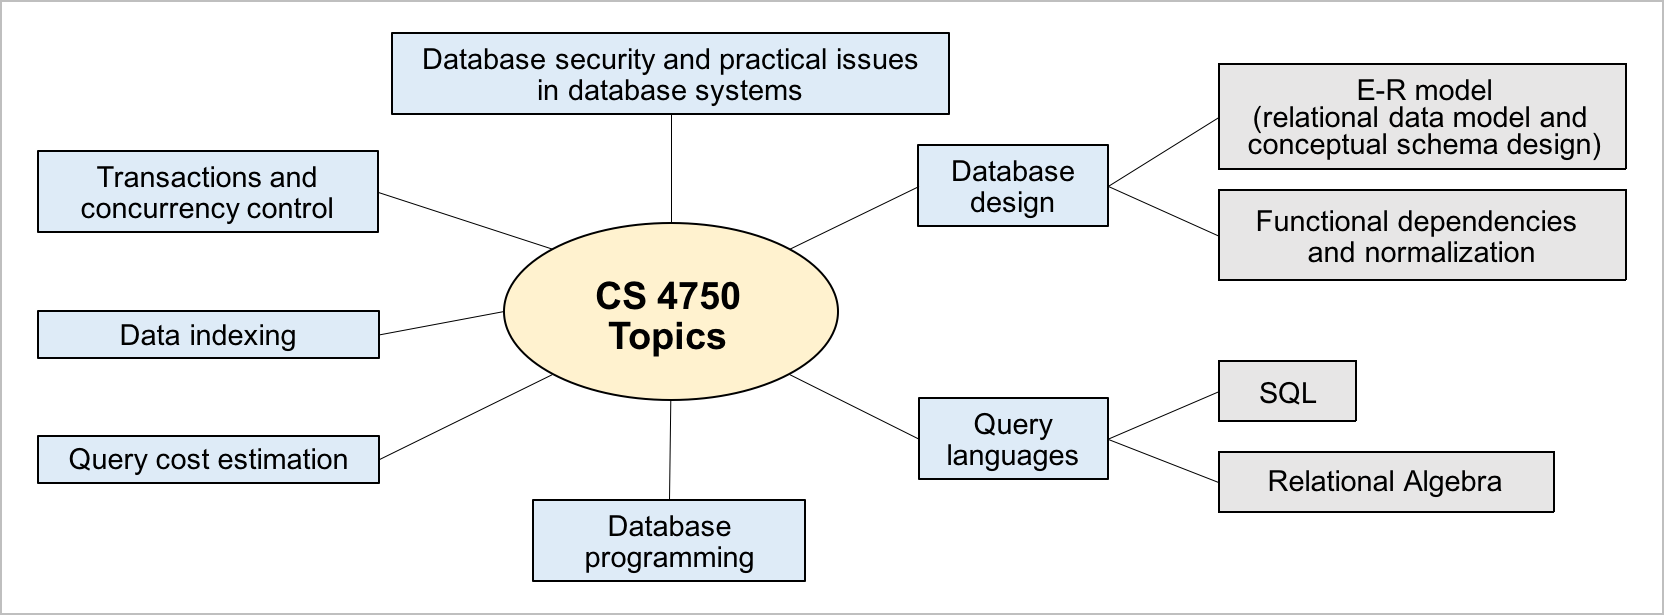 image showing topics covered in this course